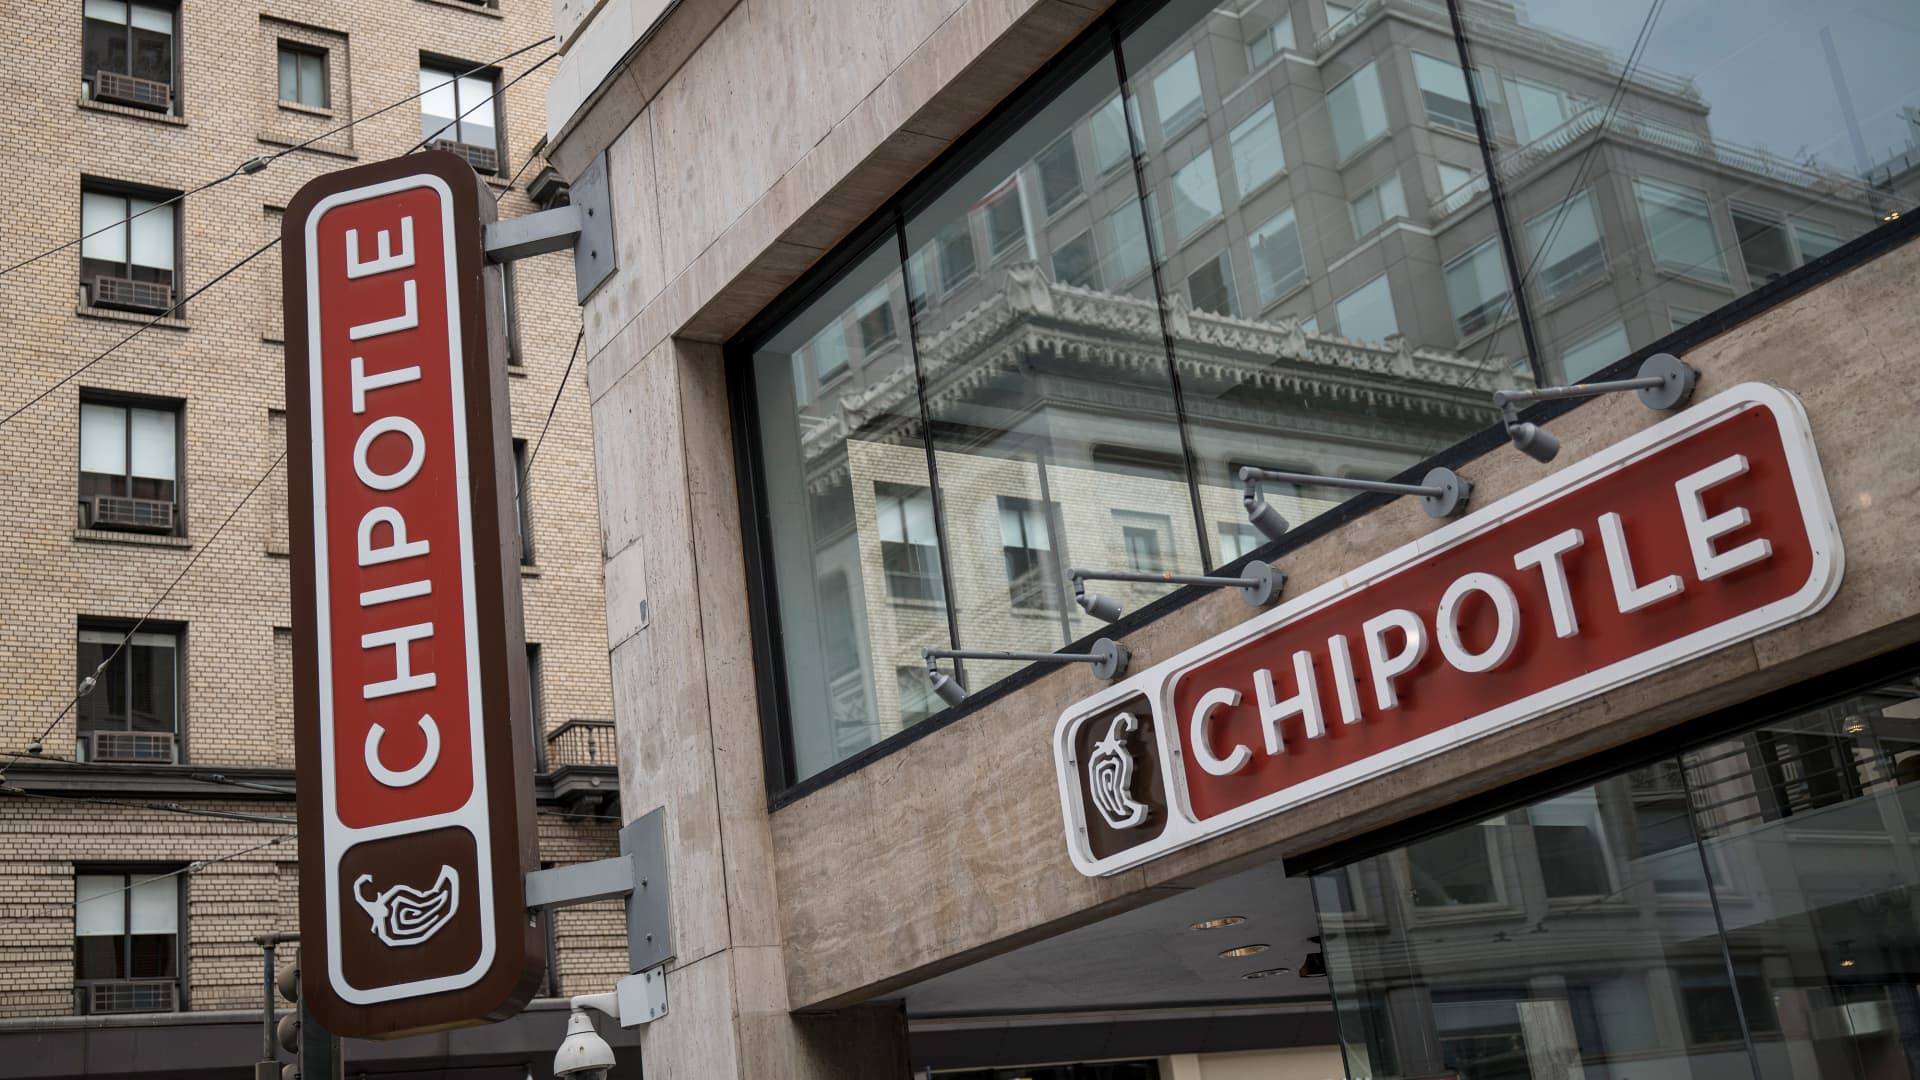 Stocks making the biggest moves midday: Chipotle, Microsoft, Spotify, Alphabet a..